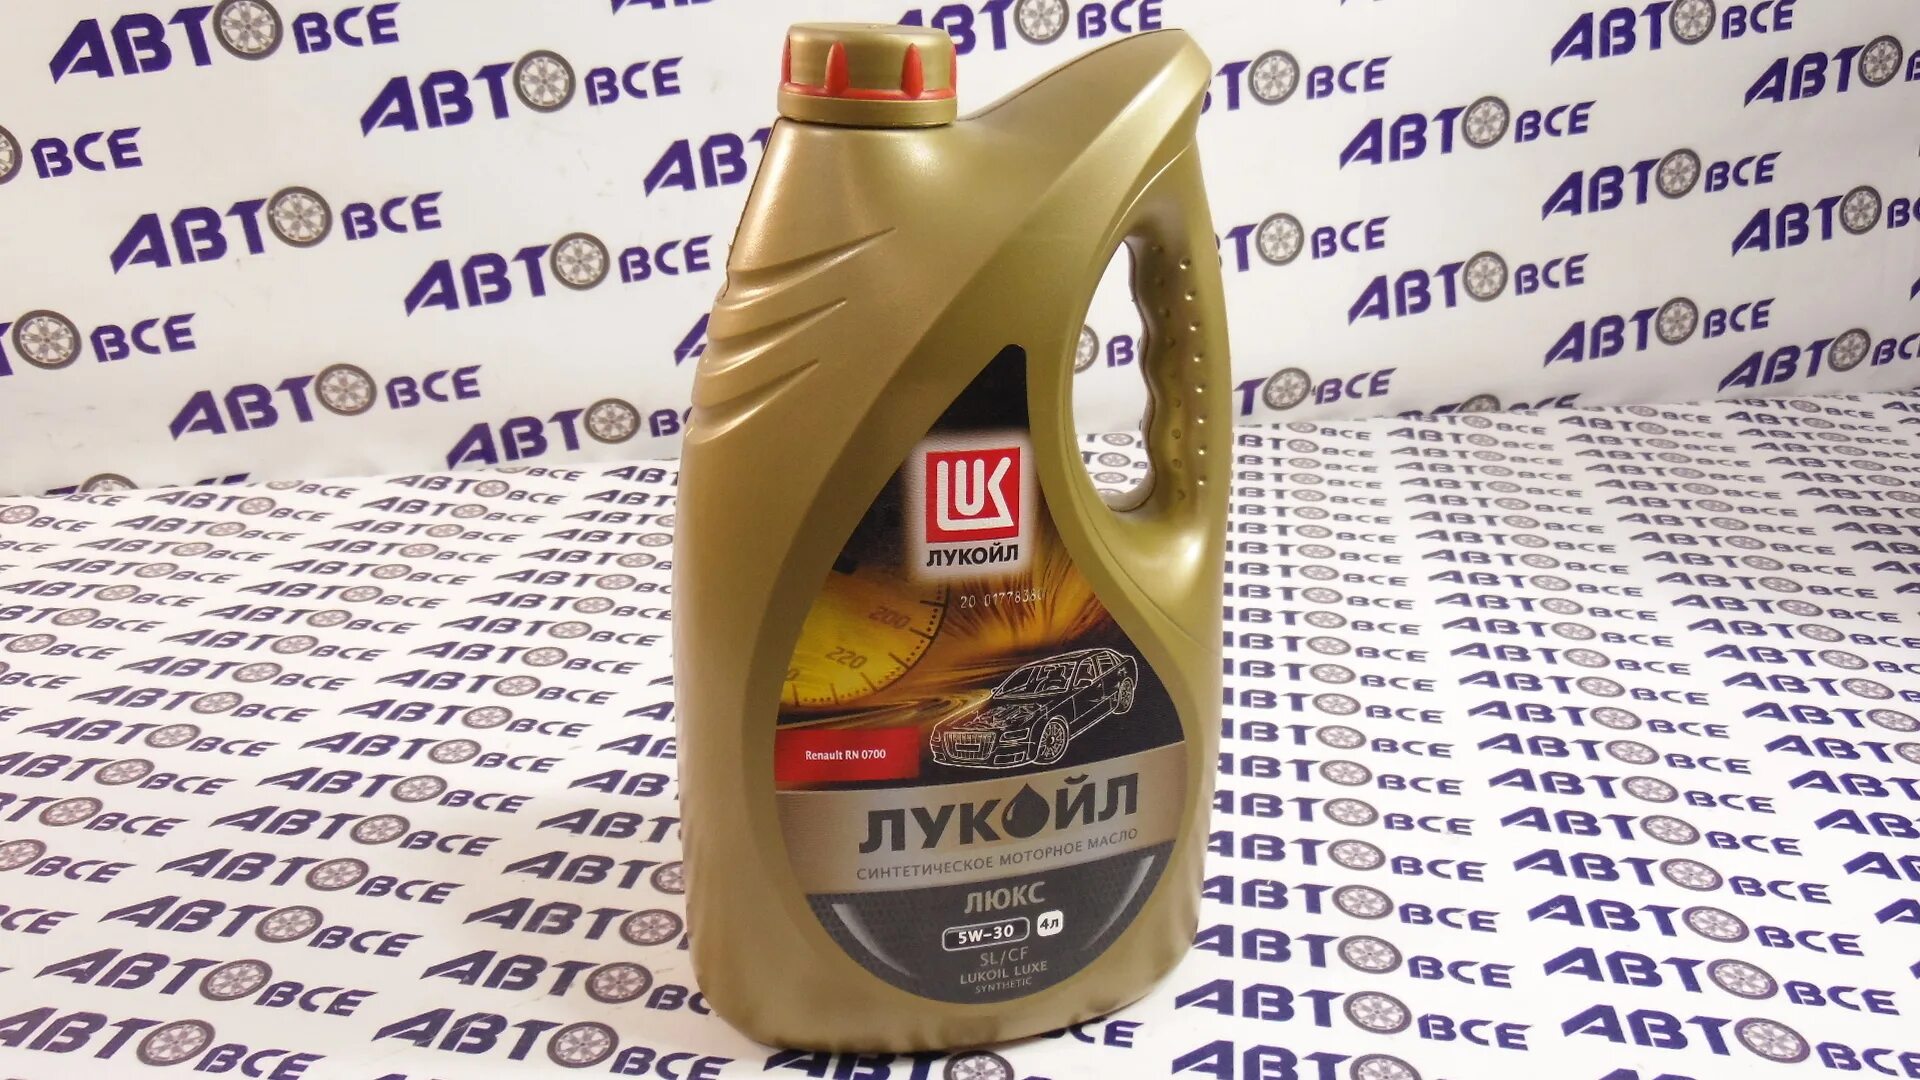 Масло 5w30 краснодар. Lukoil 196256. 5w30 Luxe SL/CF 4l. Luxe 5w30 SL\CF 4 Ë 801880. Моторное масло Лукойл Люкс 5w30.